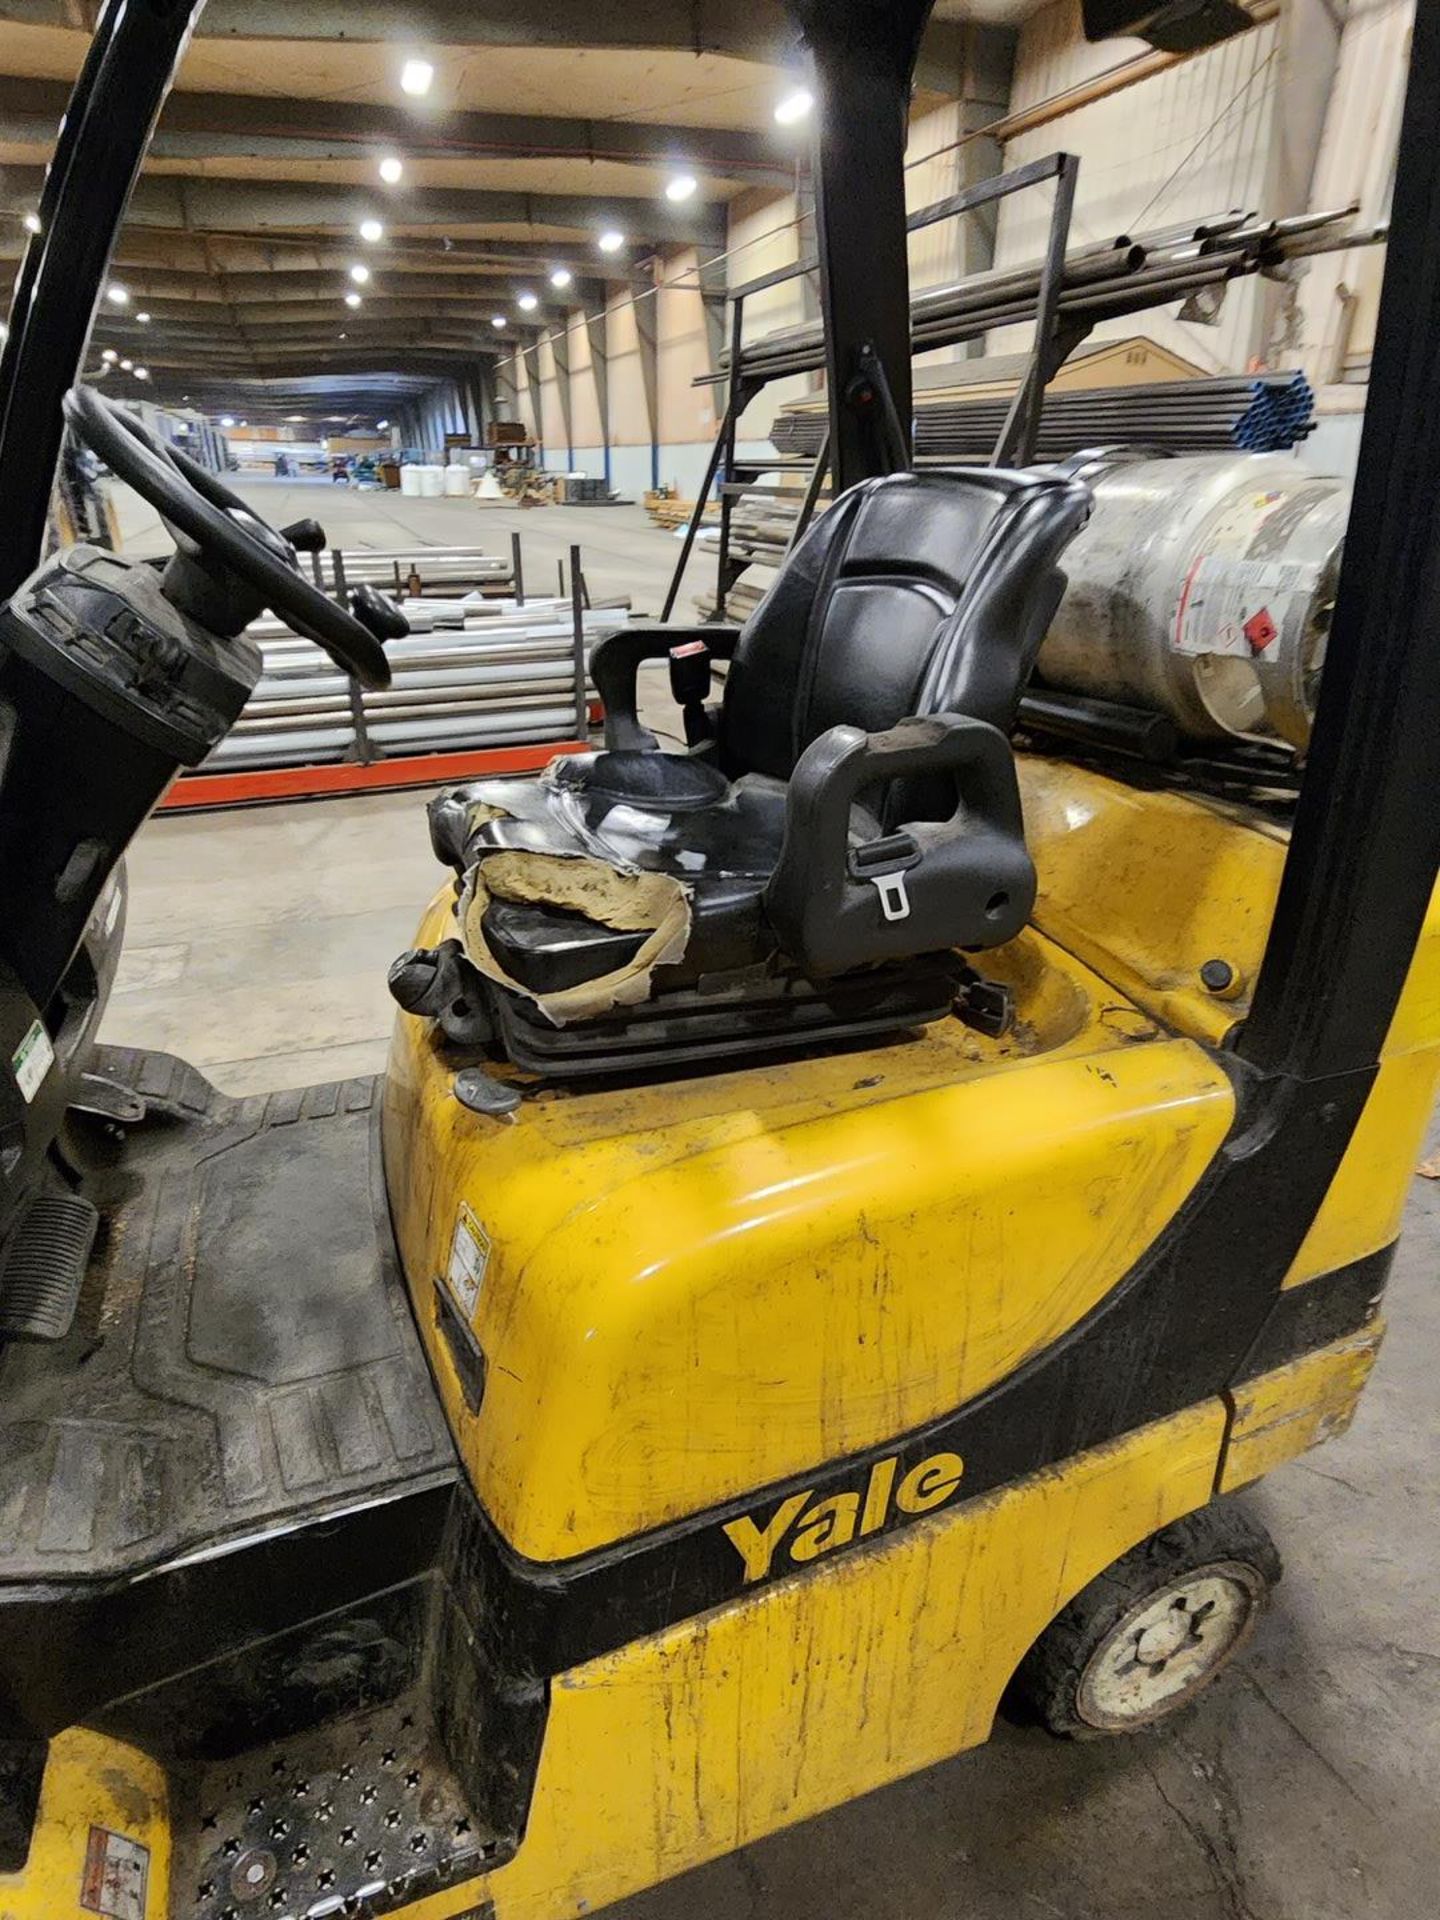 Yale GLC0VXNEAQO84 LP Forklift 4-Stage Mast, W/ 72" Forks, 240" Max Lift Ht., 4,577hrs, 4400lb Cap.; - Image 5 of 15